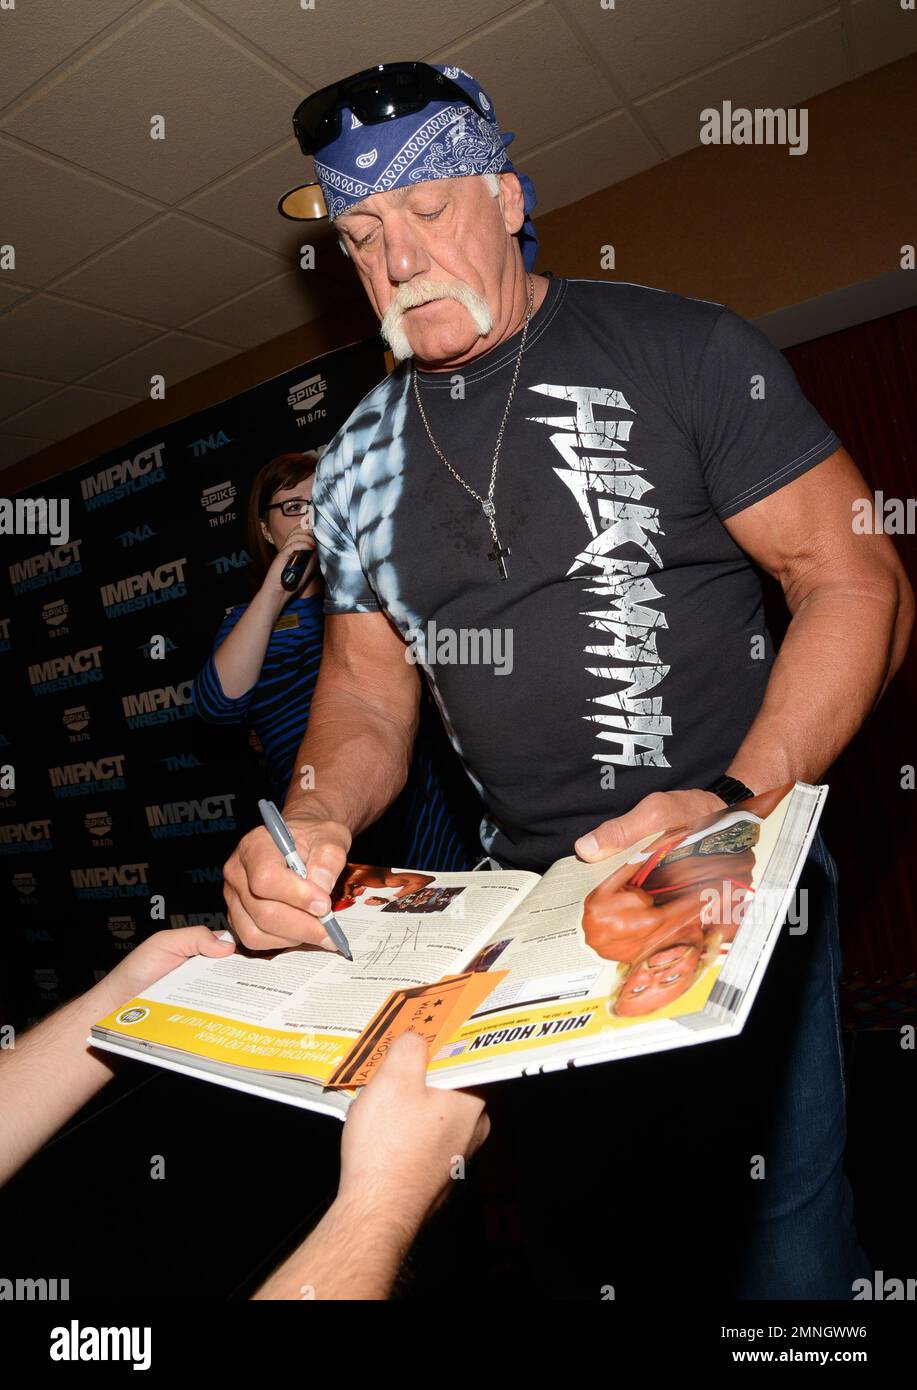 FILE PHOTO** Hulk Hogan Reportedly Can't Feel Lower Body following Back  Surgery. LAS VEGAS, NV - May 15: Hulk Hogan Helps Welcome TNA Impact  Wrestling to Orleans Arena on May 15, 2013